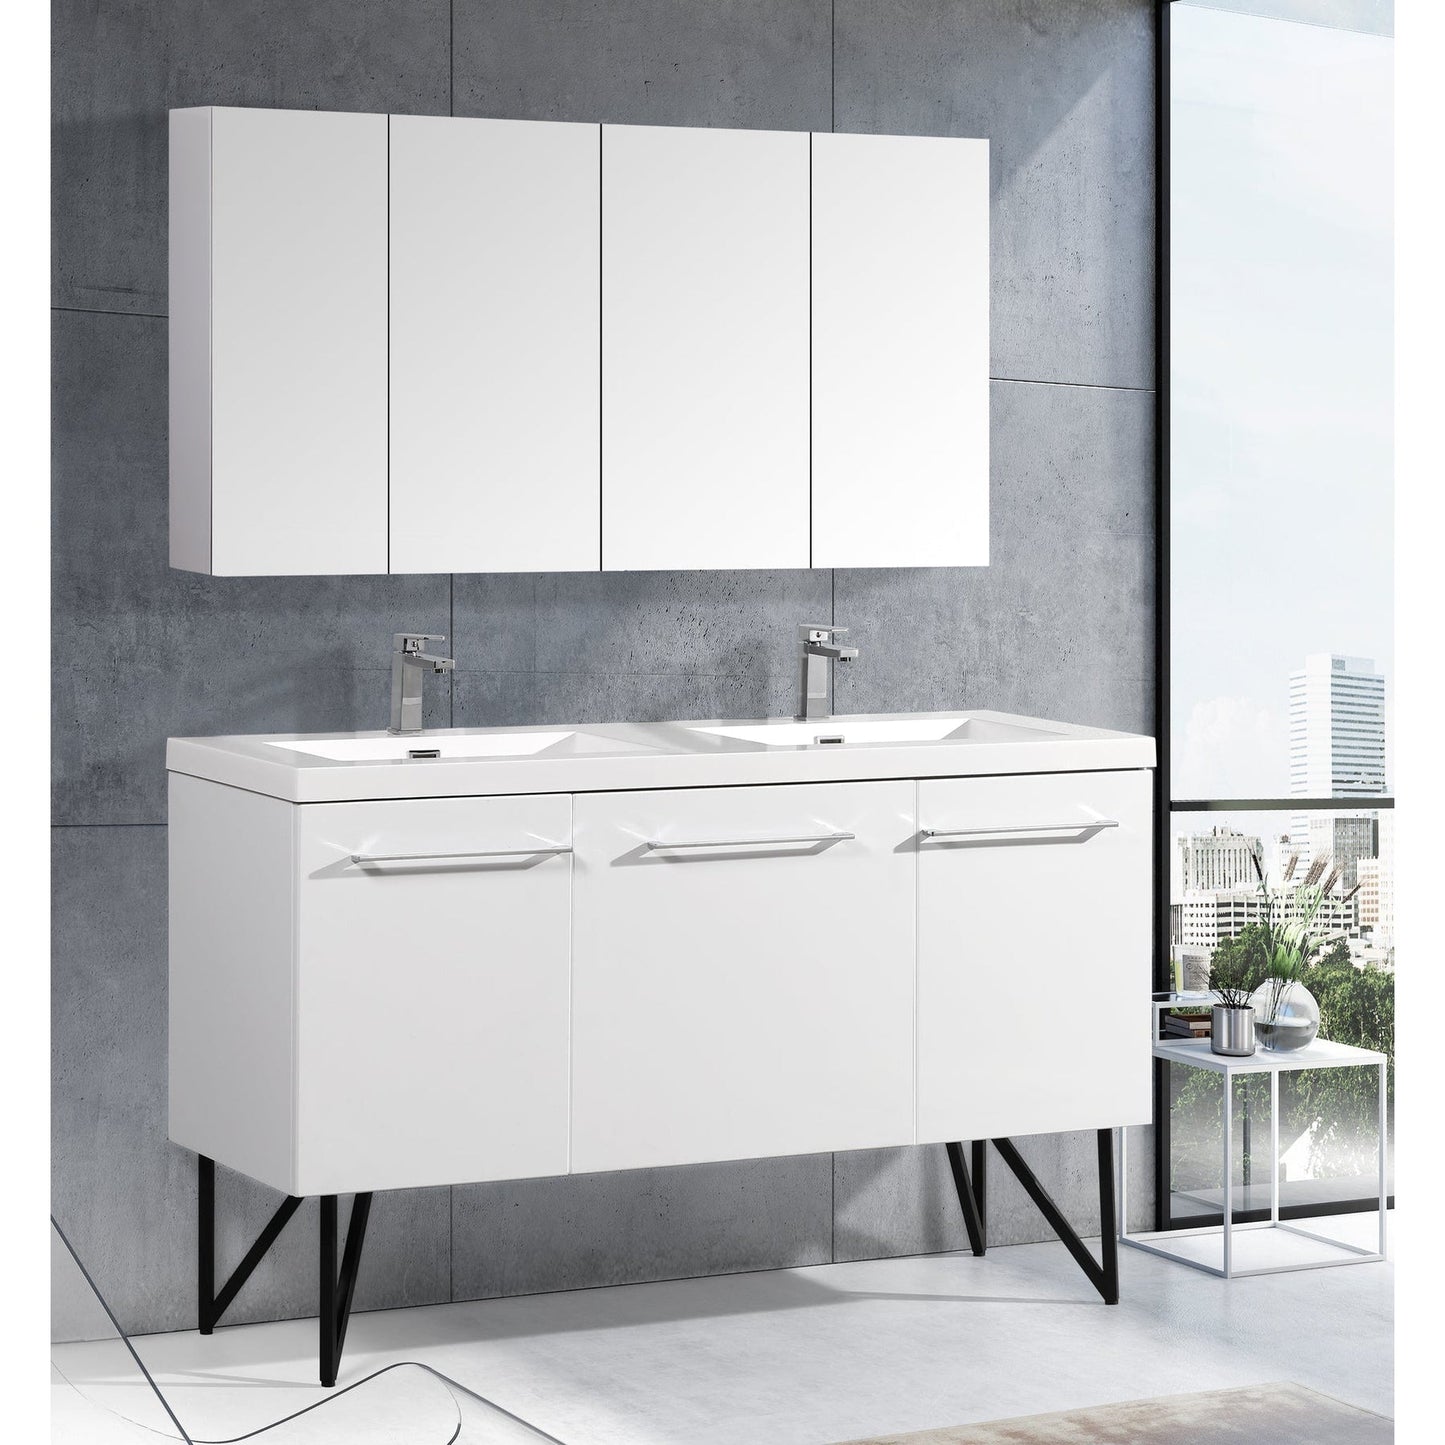 Swiss Madison Annecy 60" x 36" Freestanding White Bathroom Vanity With Ceramic Double Sink and Stainless Steel Metal Legs